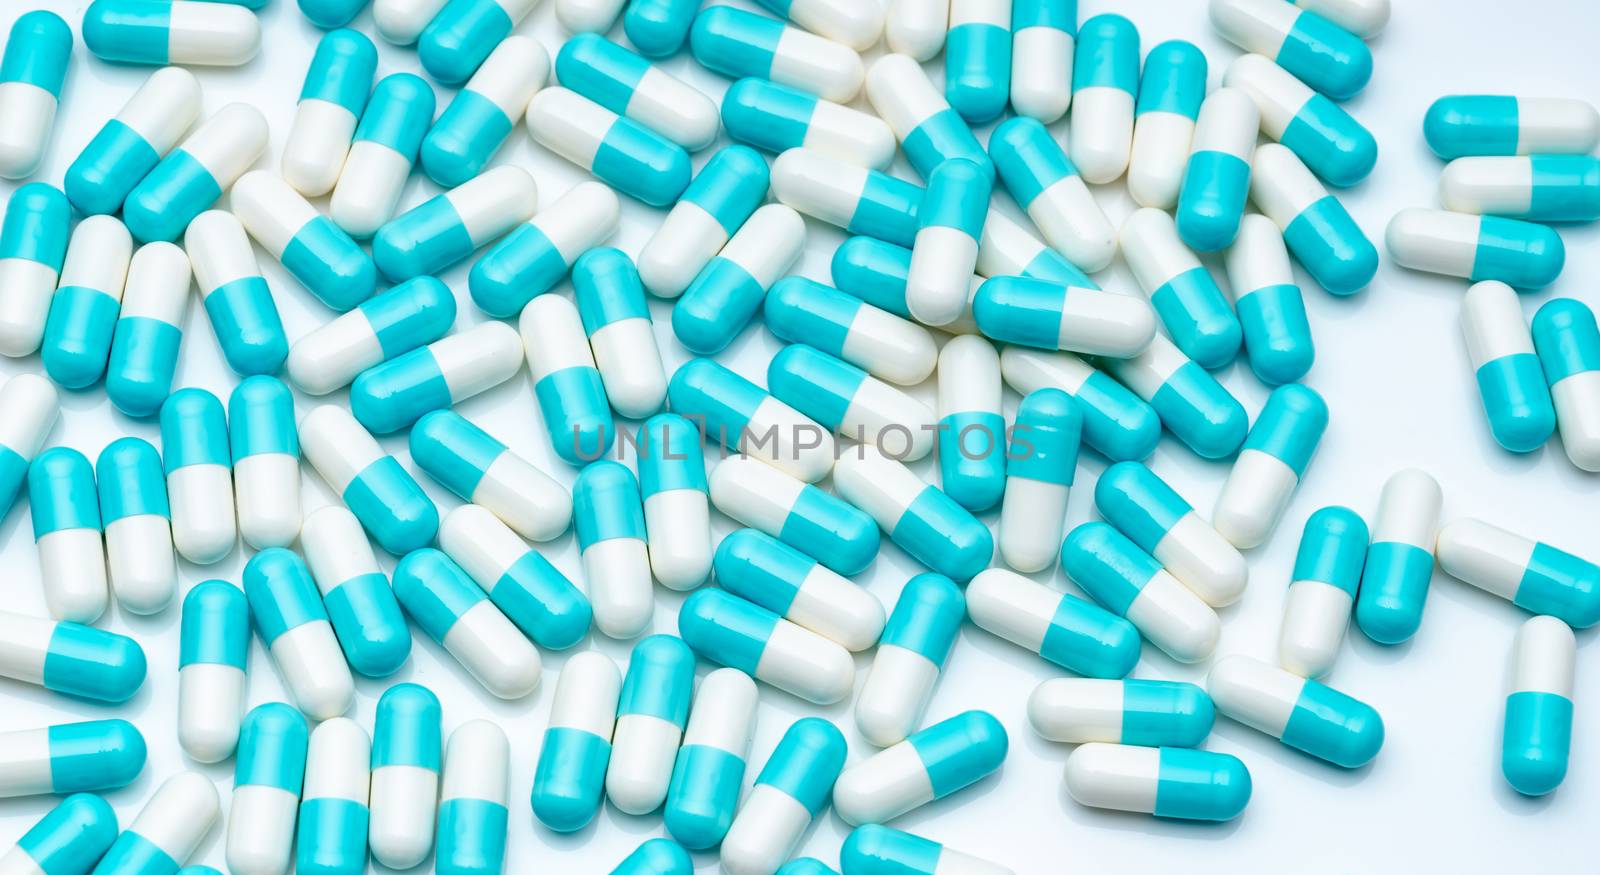 Blue and white capsule pills on white background. Pharmaceutical industry. Blue pastel color capsule pills spread on white table. Pharmaceutics background. Healthcare and medicine. Pharmacy products.